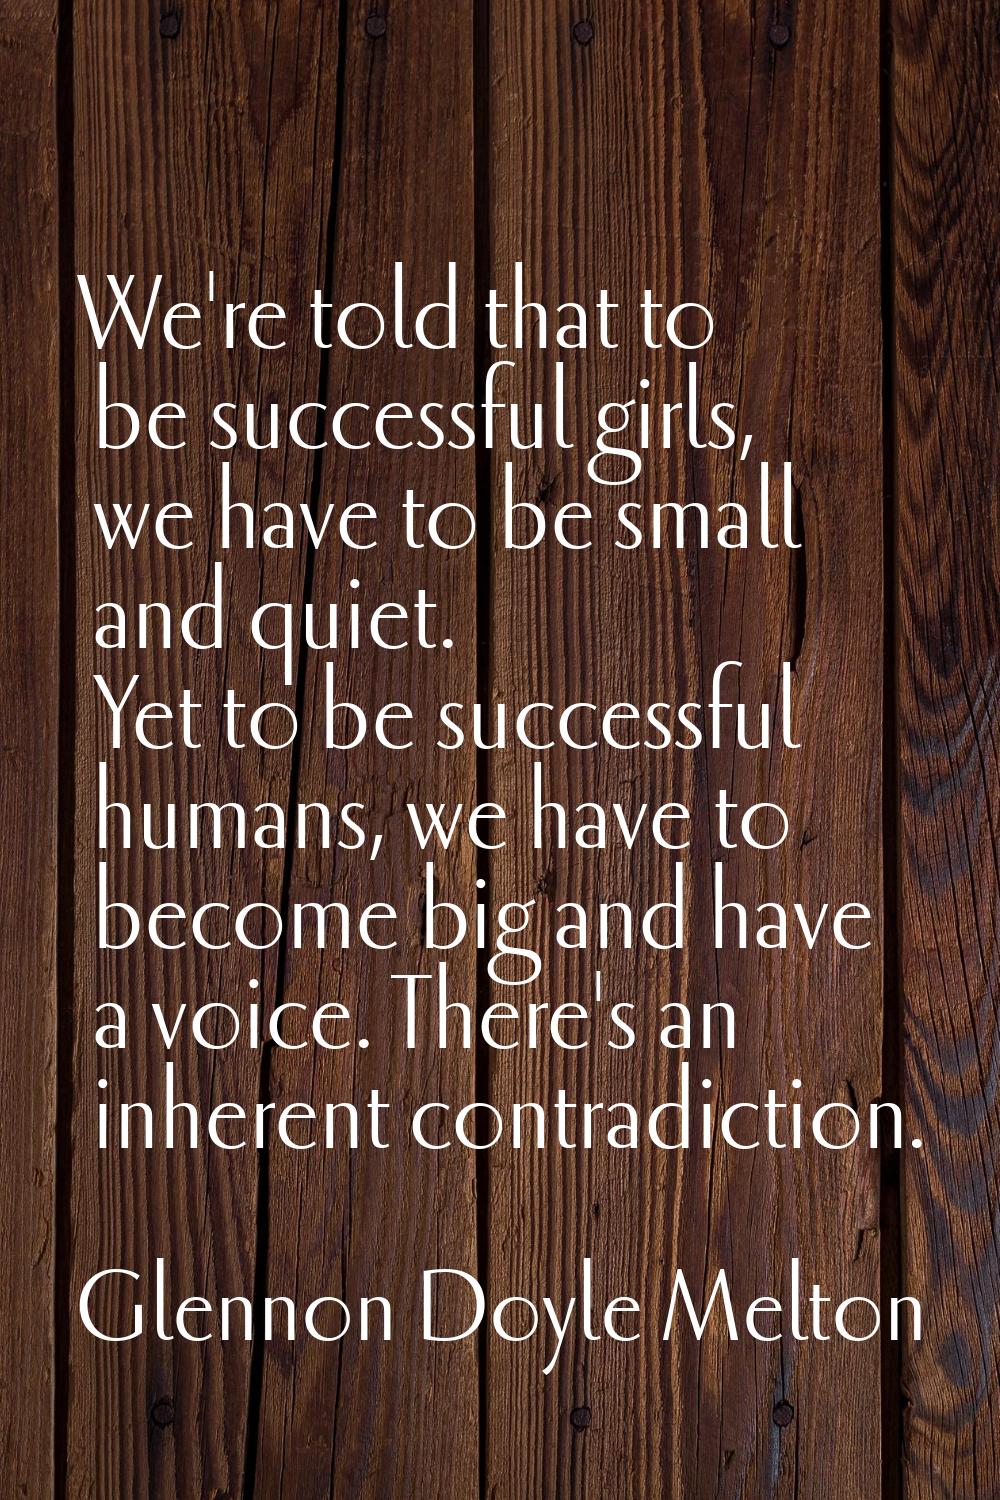 We're told that to be successful girls, we have to be small and quiet. Yet to be successful humans,